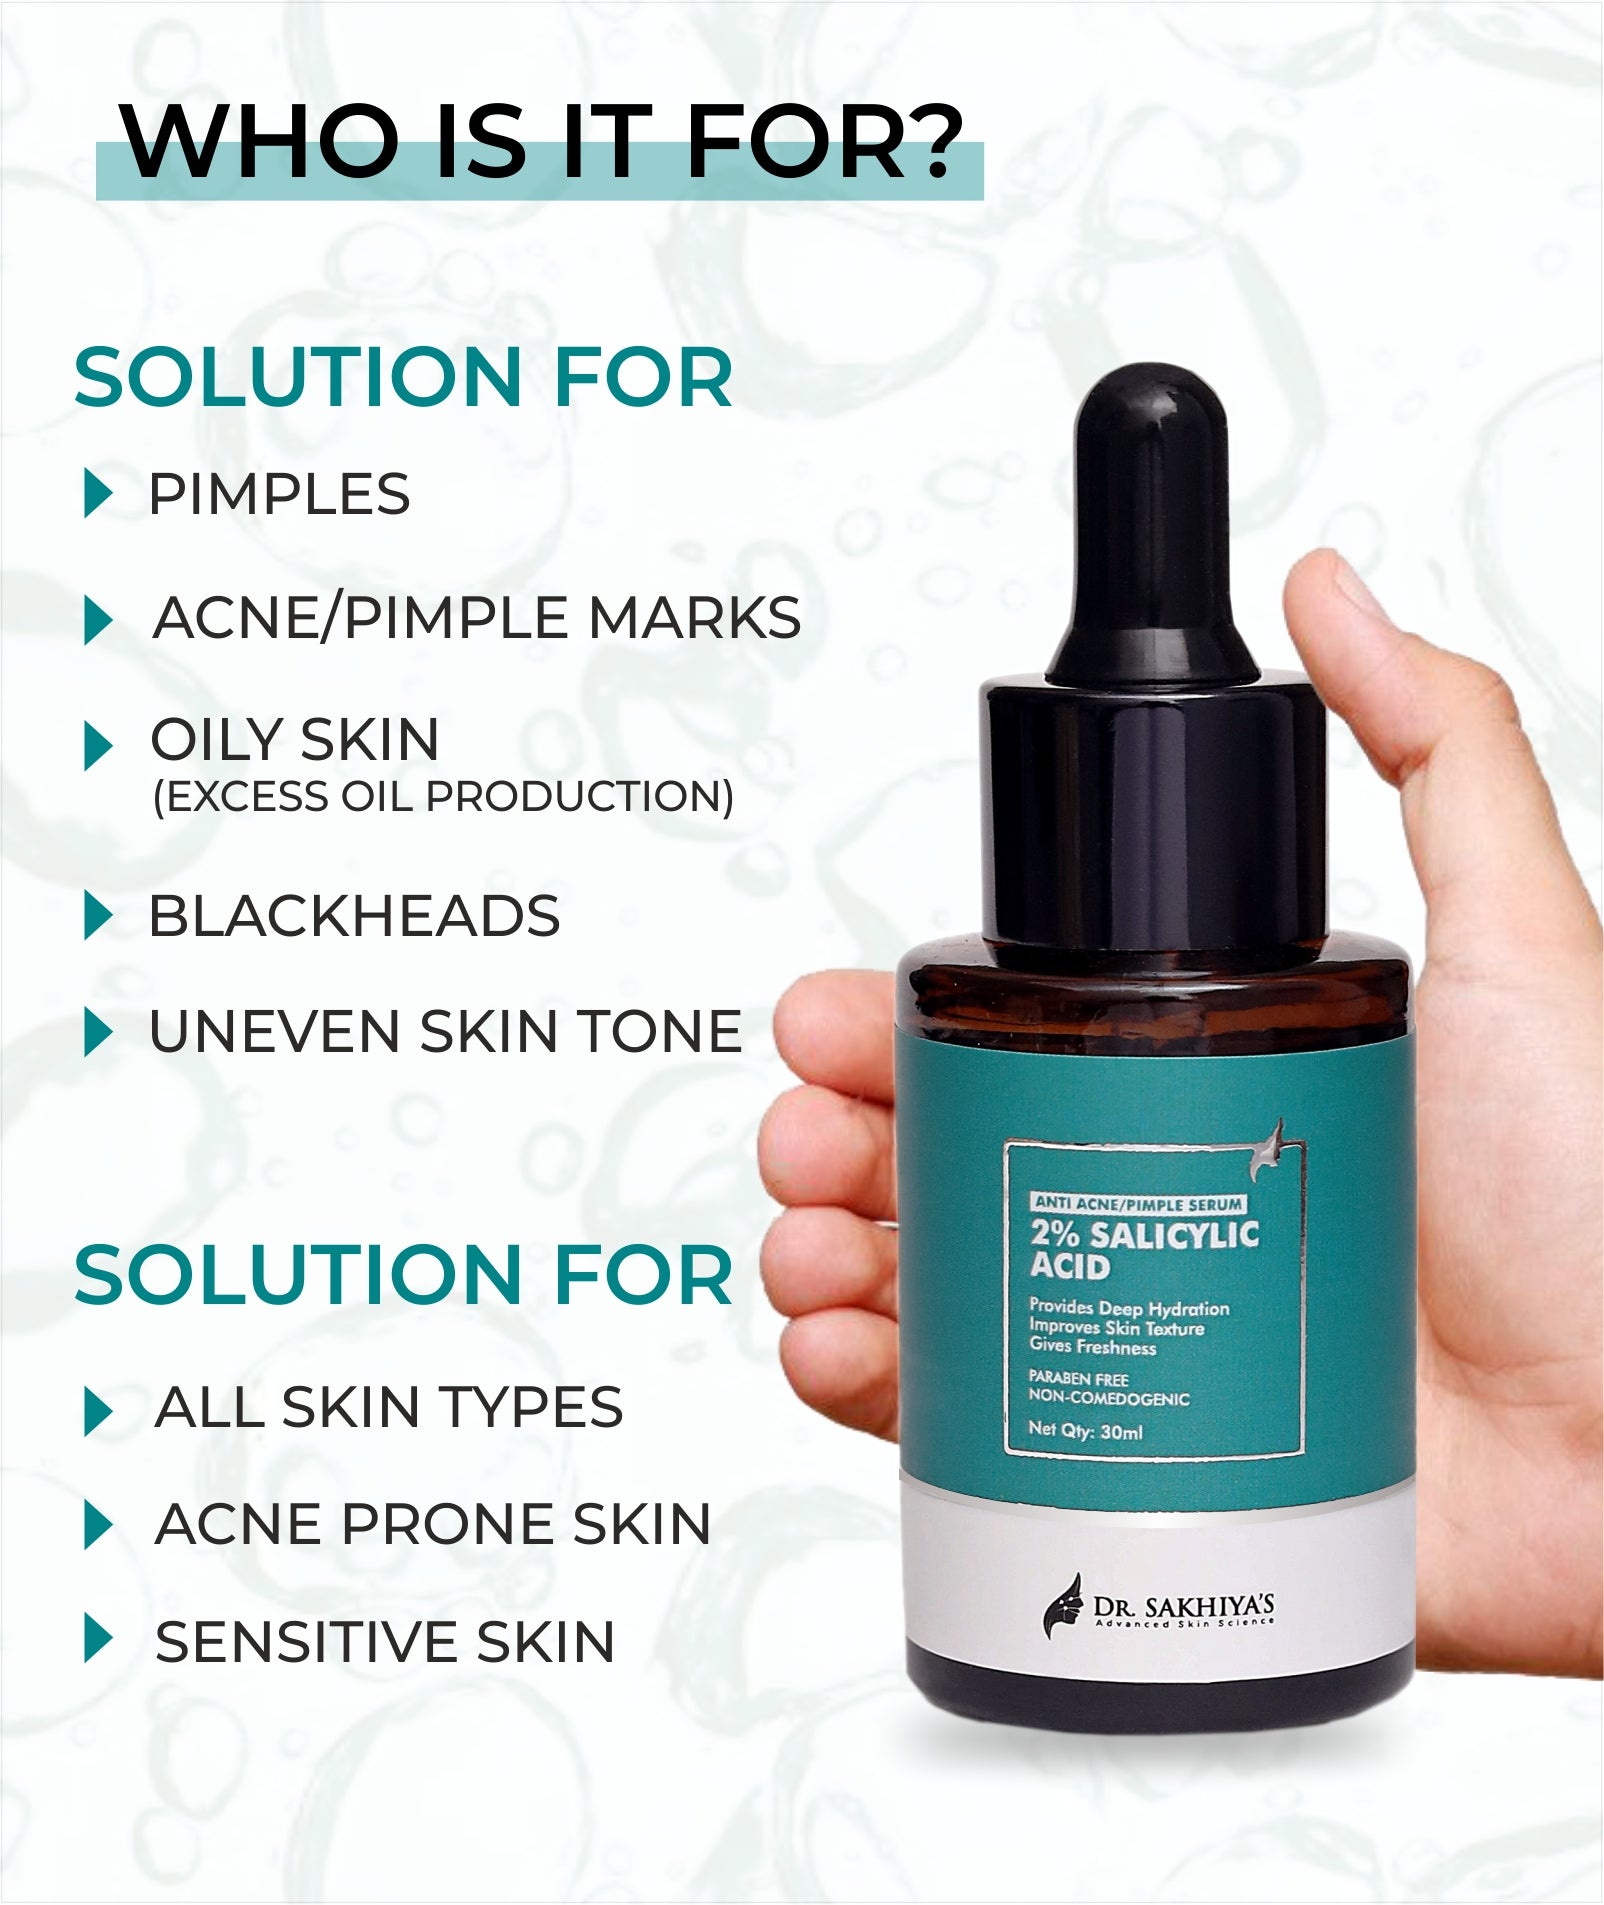 2% Salicylic Acid Serum Removes Pimple, Acne Marks And Suitable For All Skin Types